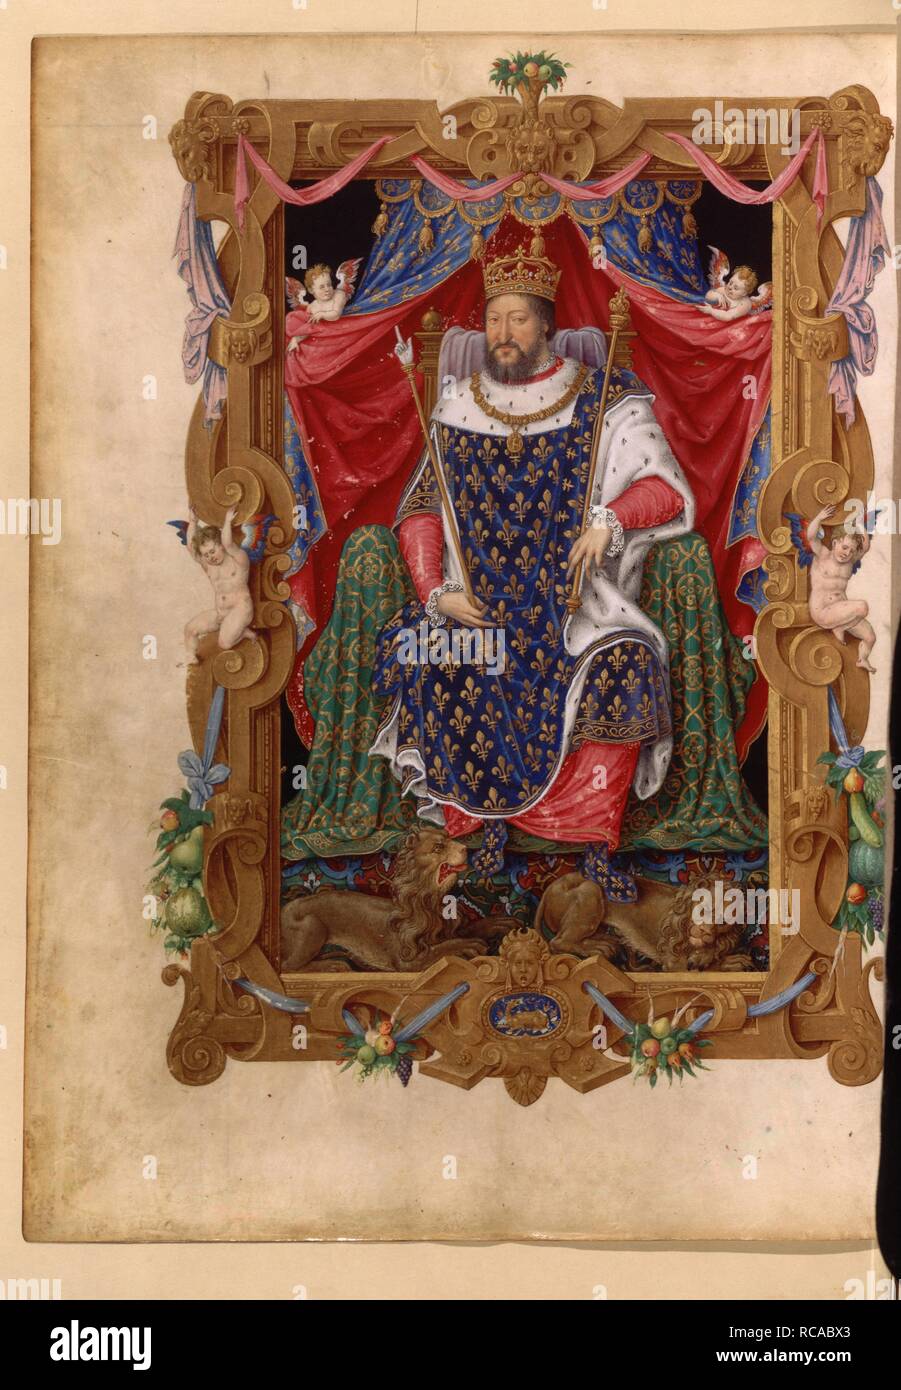 Portrait of Francis I (1494-1547), King of France, in his Coronation Robes. Museum: BIBLIOTHEQUE NATIONALE DE FRANCE. Author: Maître des Heures d'Henri II. Stock Photo